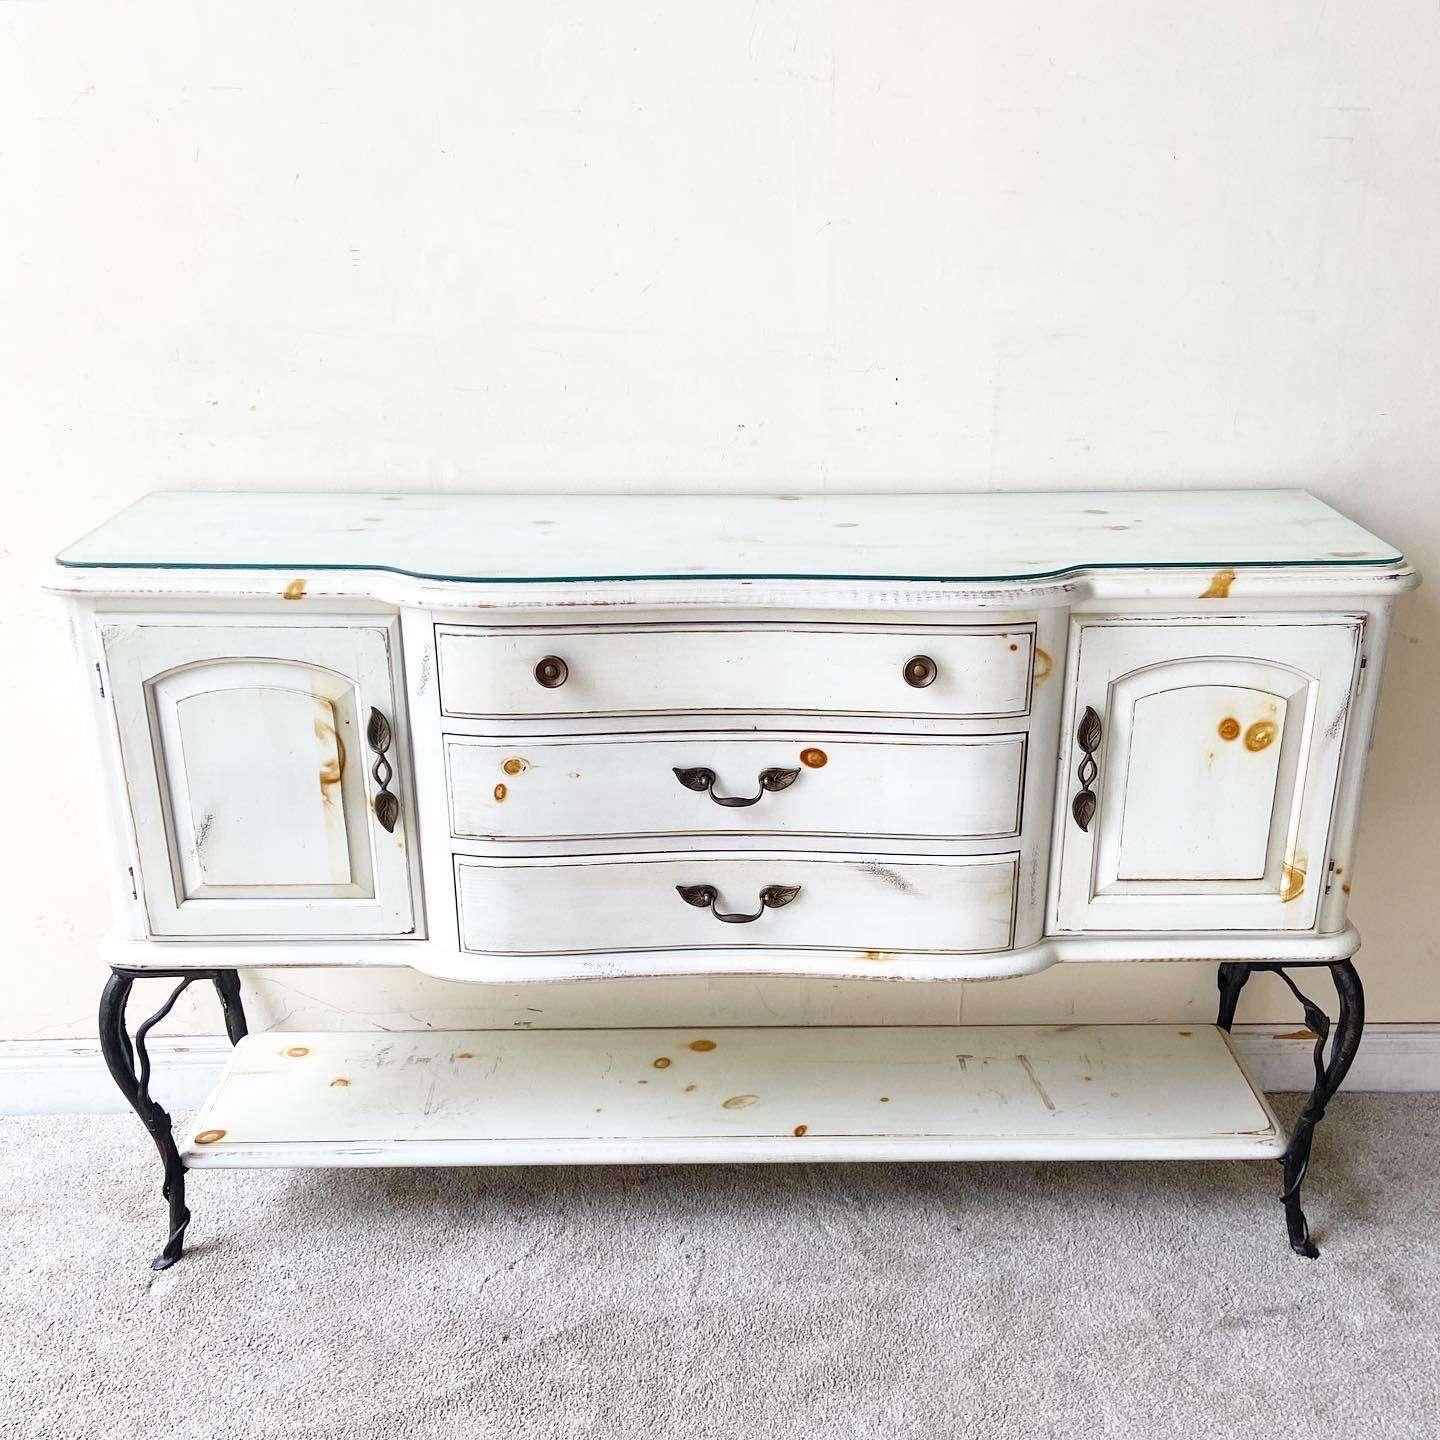 Incredible vintage French farmhouse style wooden credenza. Features a white finish with burnt Burl through the surfaces. The credenza sits on 4 iron legs with a shelf.